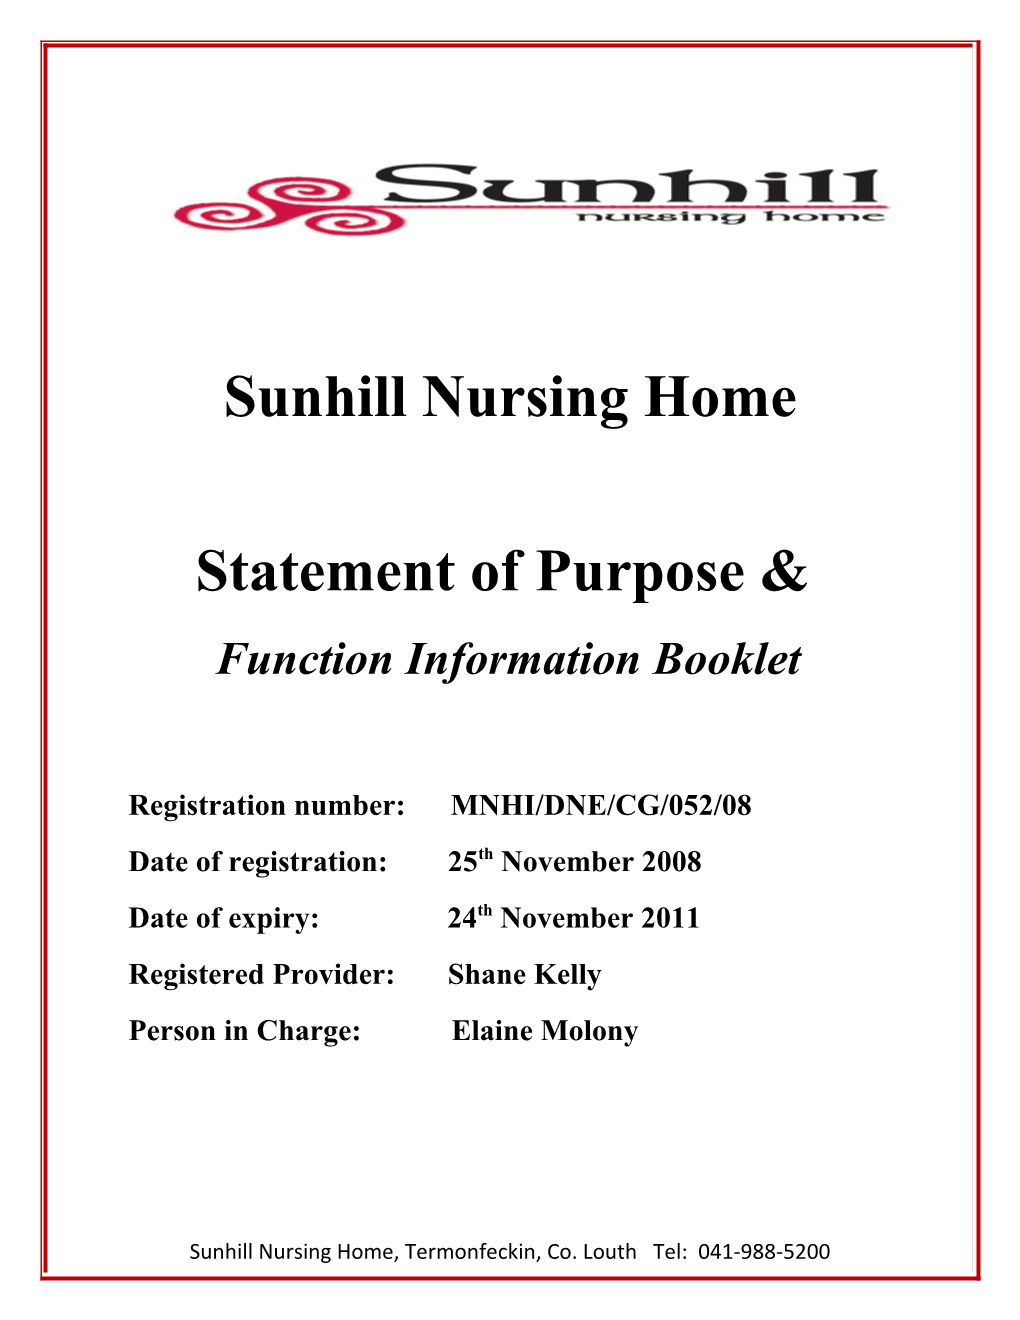 Information Booklet/ Resident Guide and Statement of Purpose and Function Templates